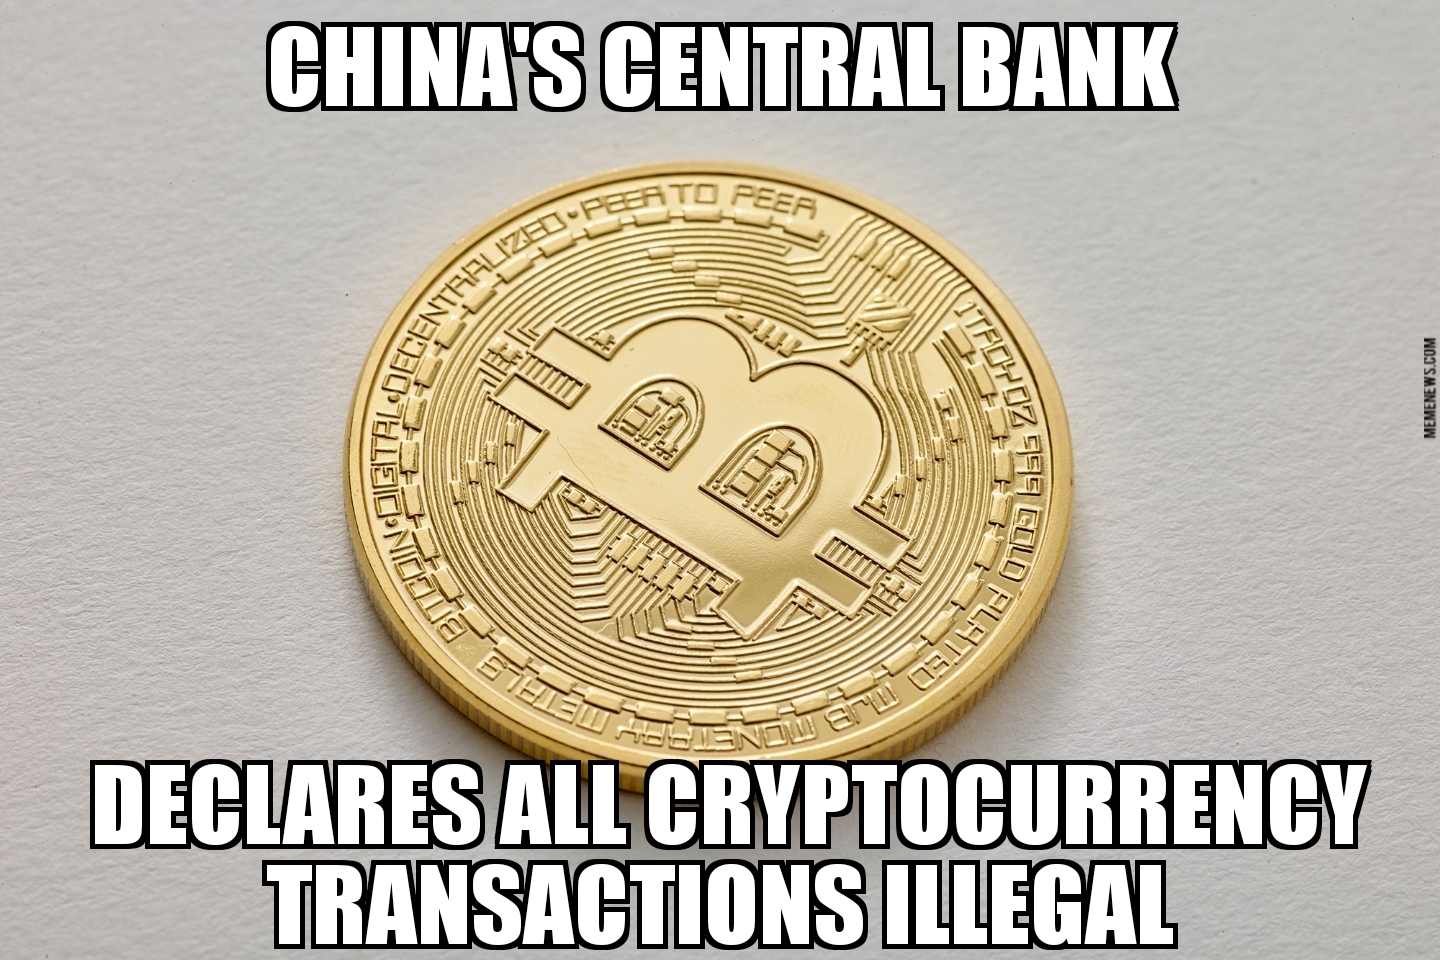 China declares cryptocurrency illegal